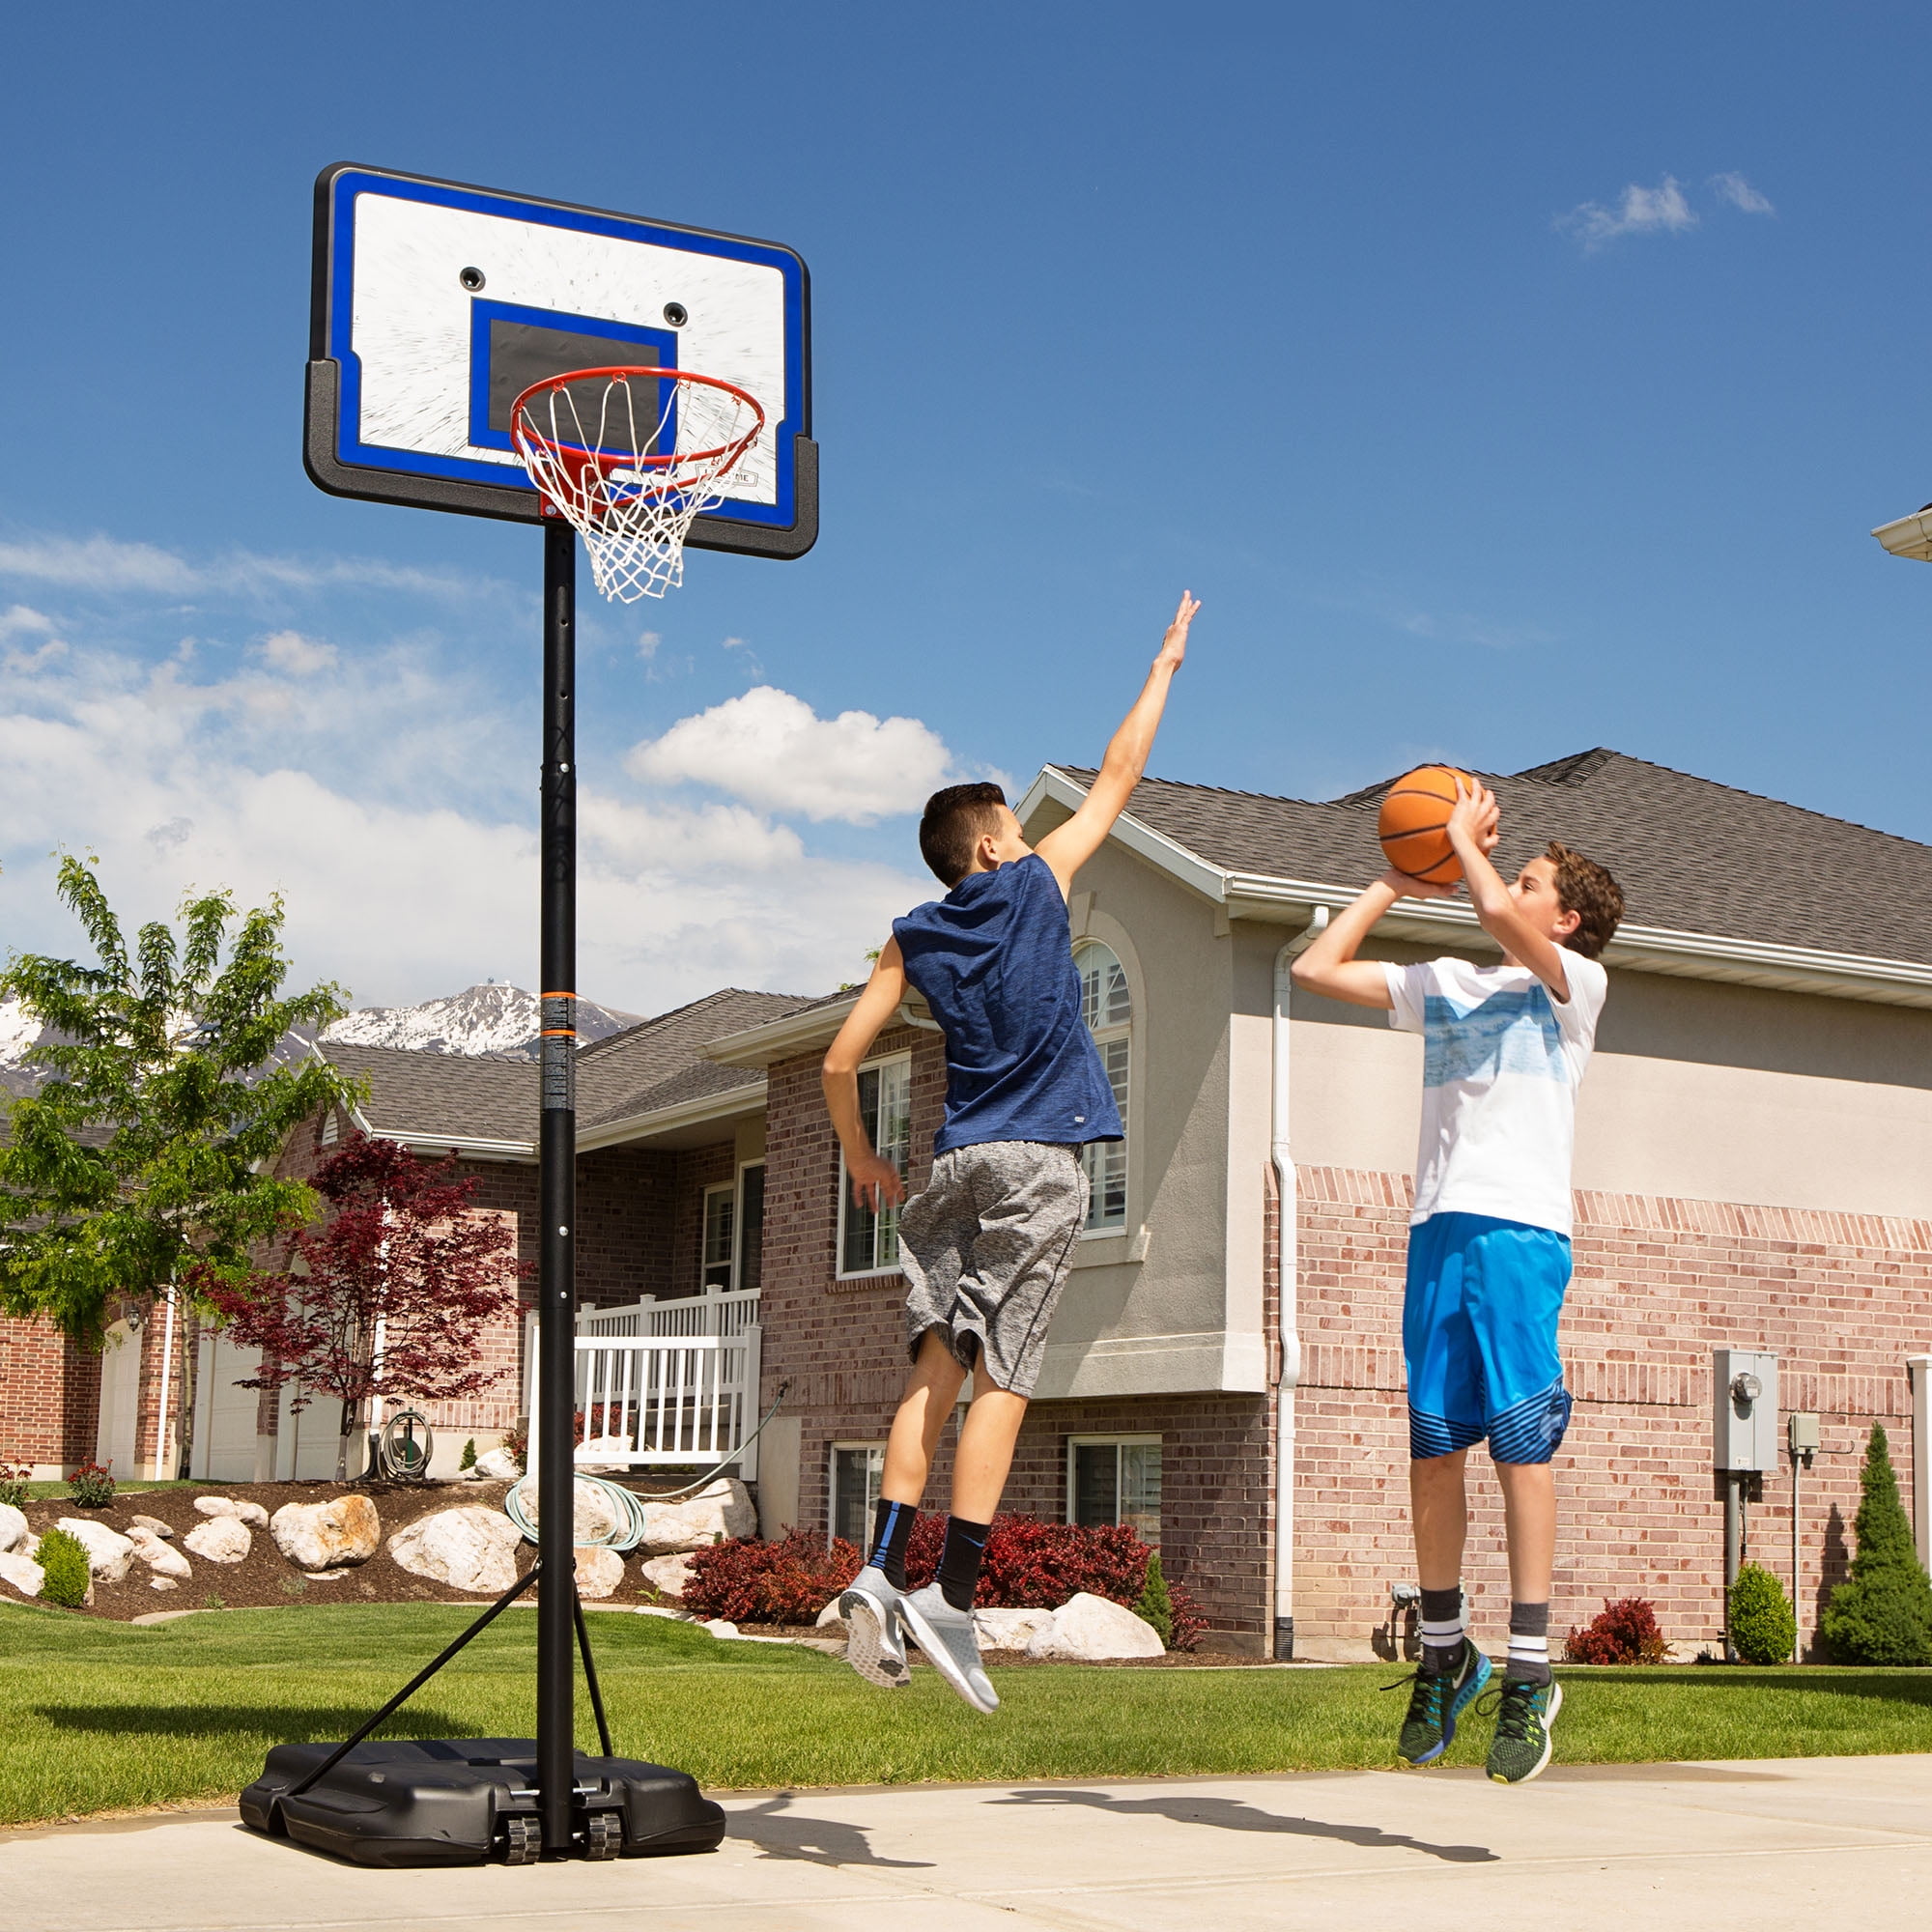 Details about   Portable Basketball Hoop Goal Adjustable 44 Inch Pro Court Outdoor Sport Brand 